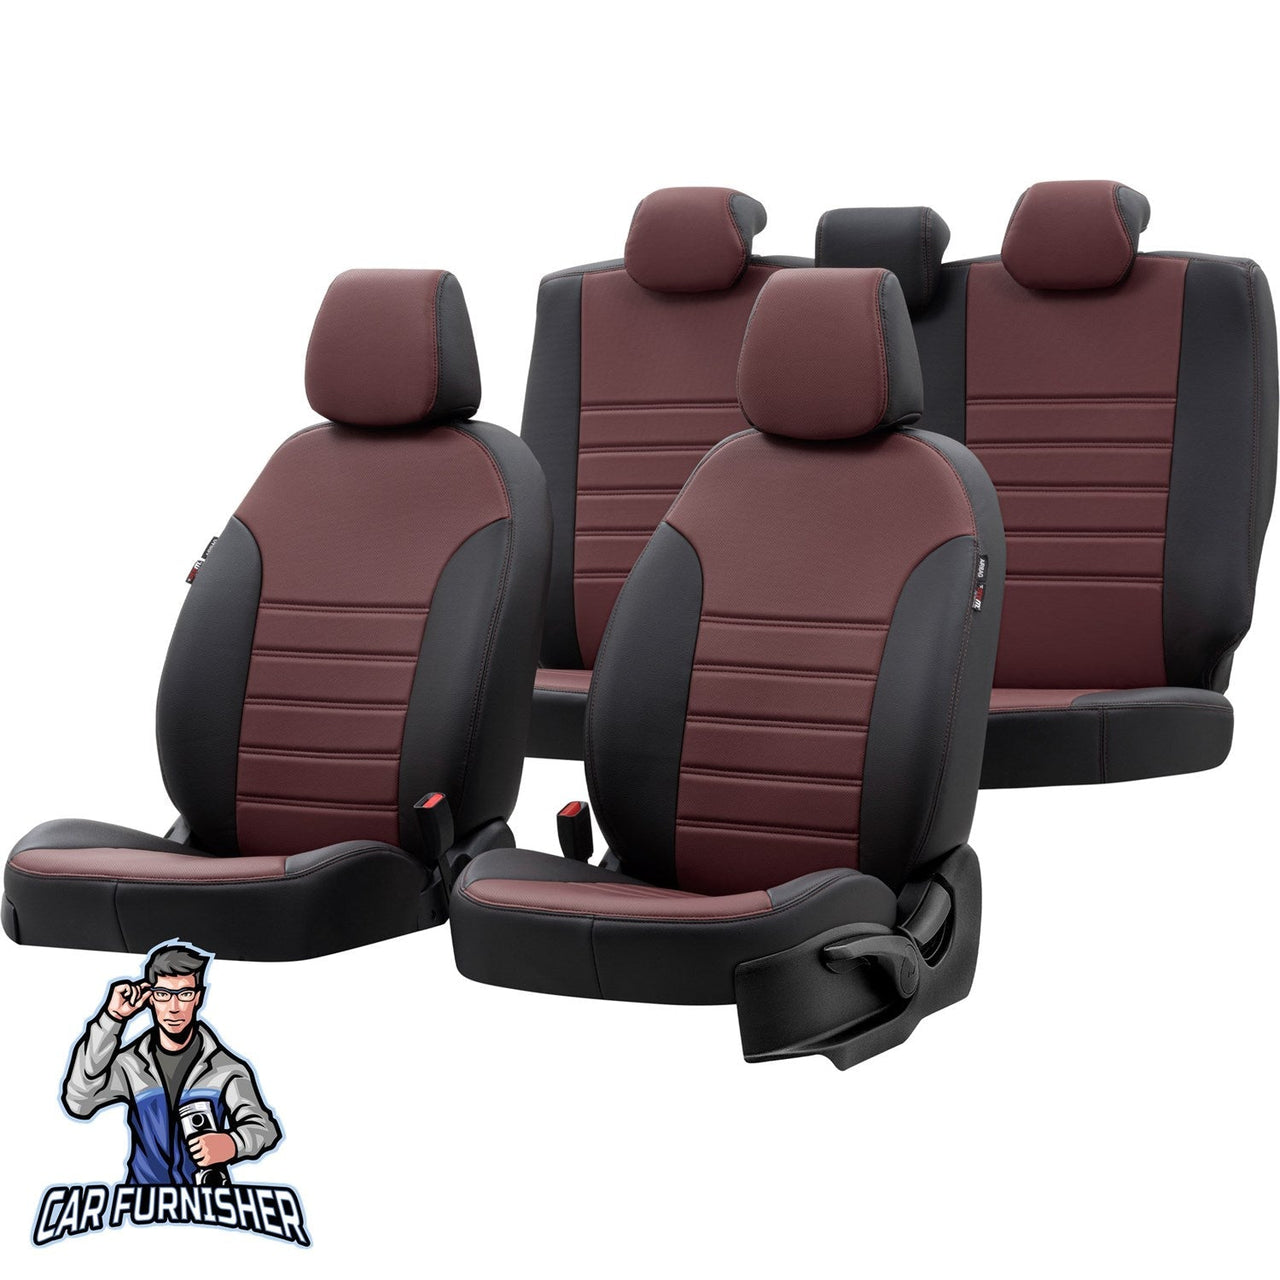 Subaru Forester Seat Cover Istanbul Leather Design Burgundy Leather